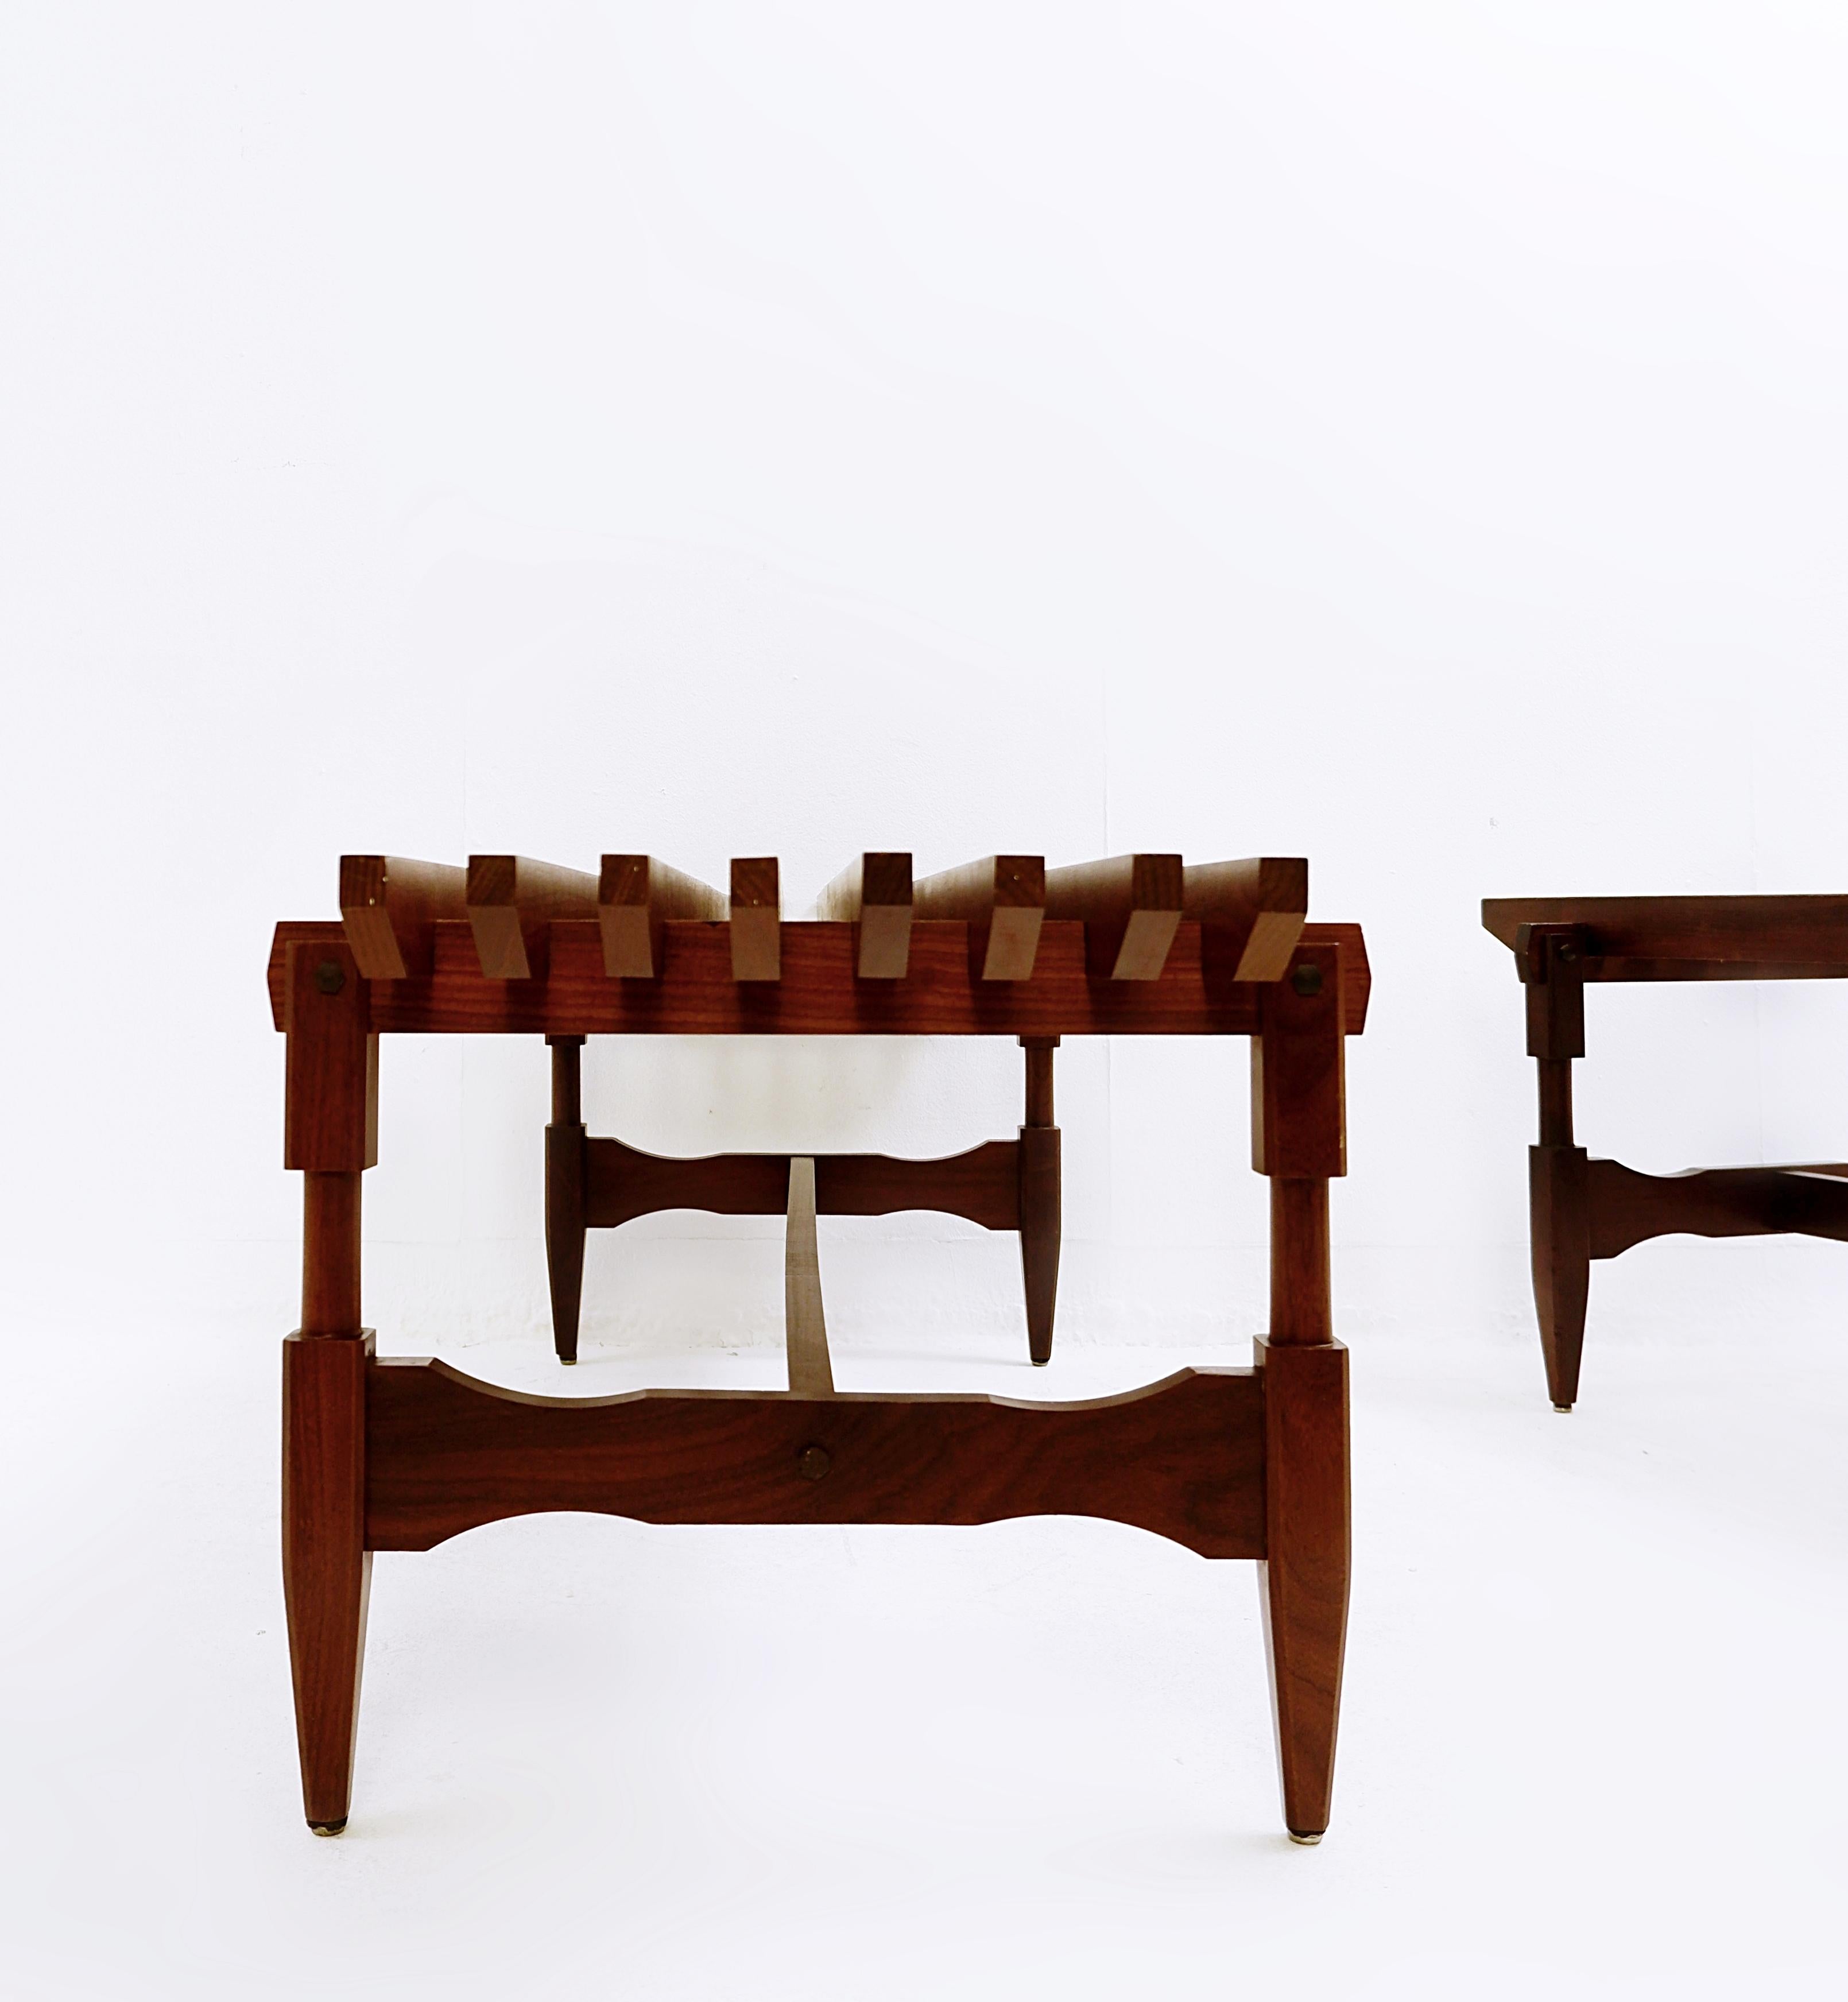 Pair of Mid-century wood Bench by Ico & Luisa Parisi - 1950s For Sale 2